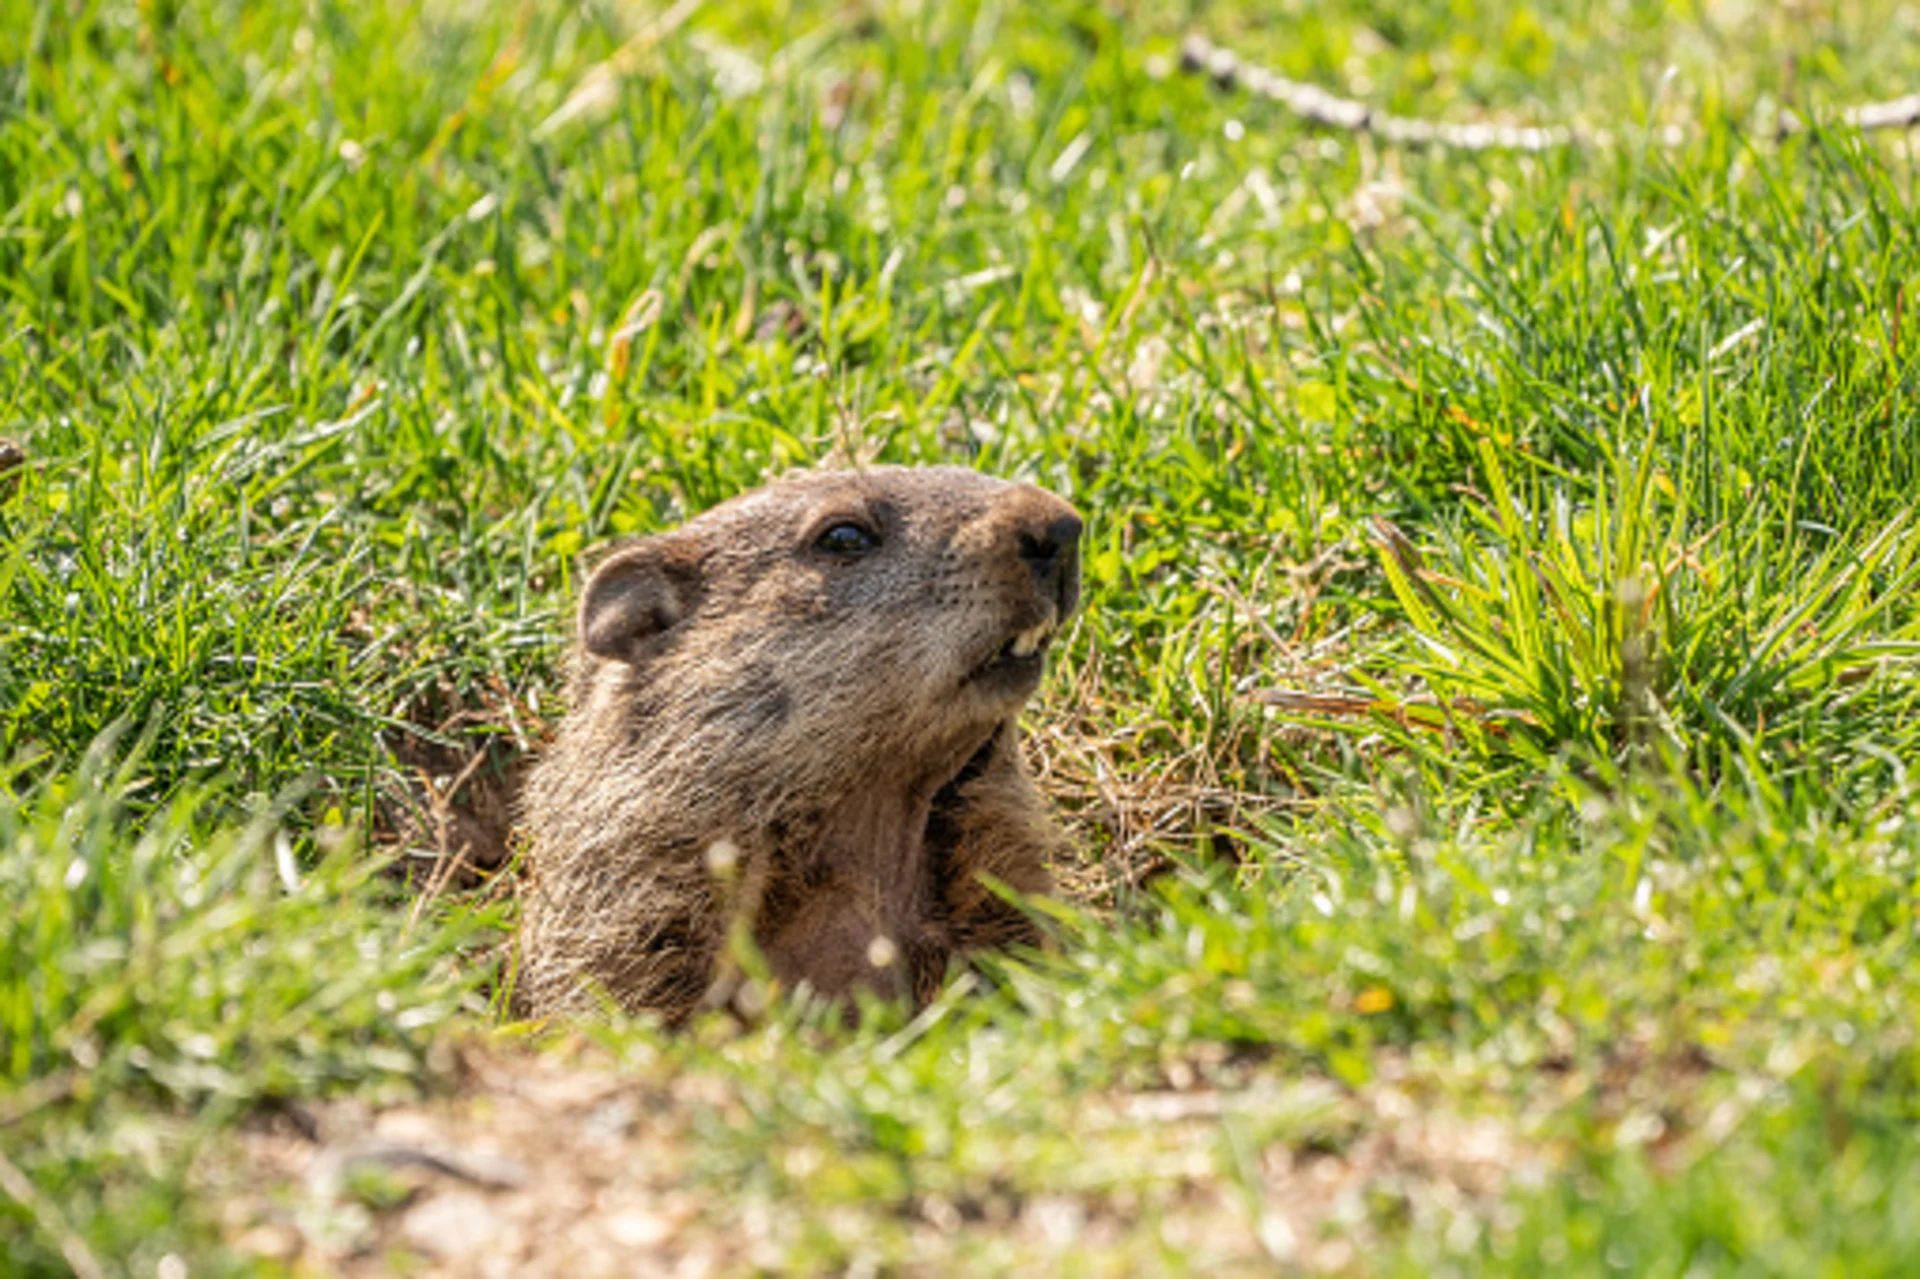 Groundhog Day 2022 results: See them here